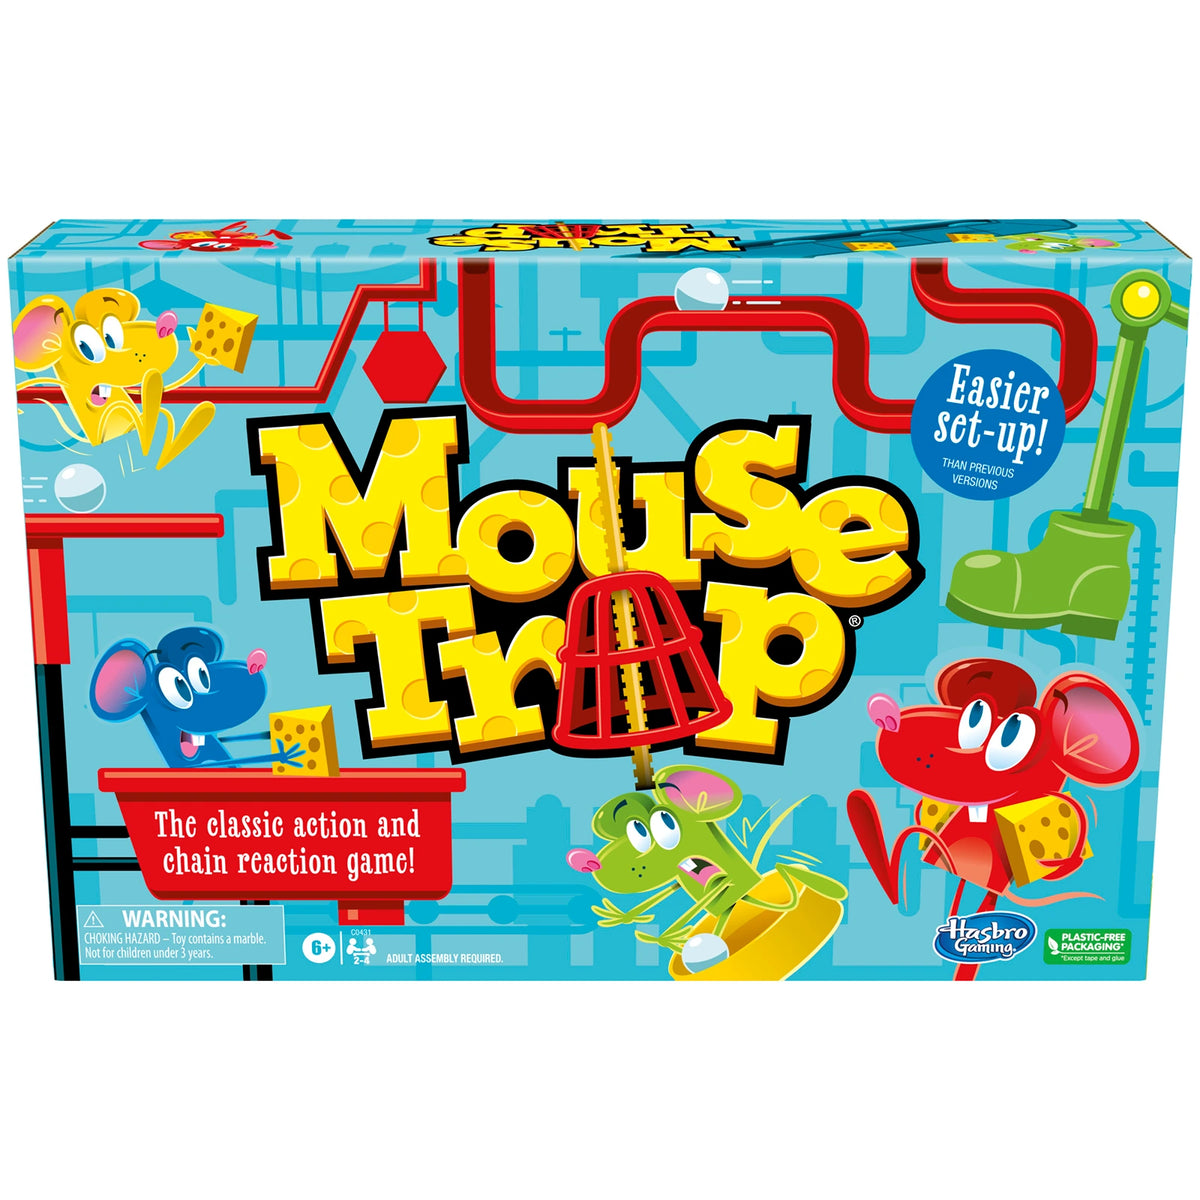 Elefun and Friends Mouse Trap 